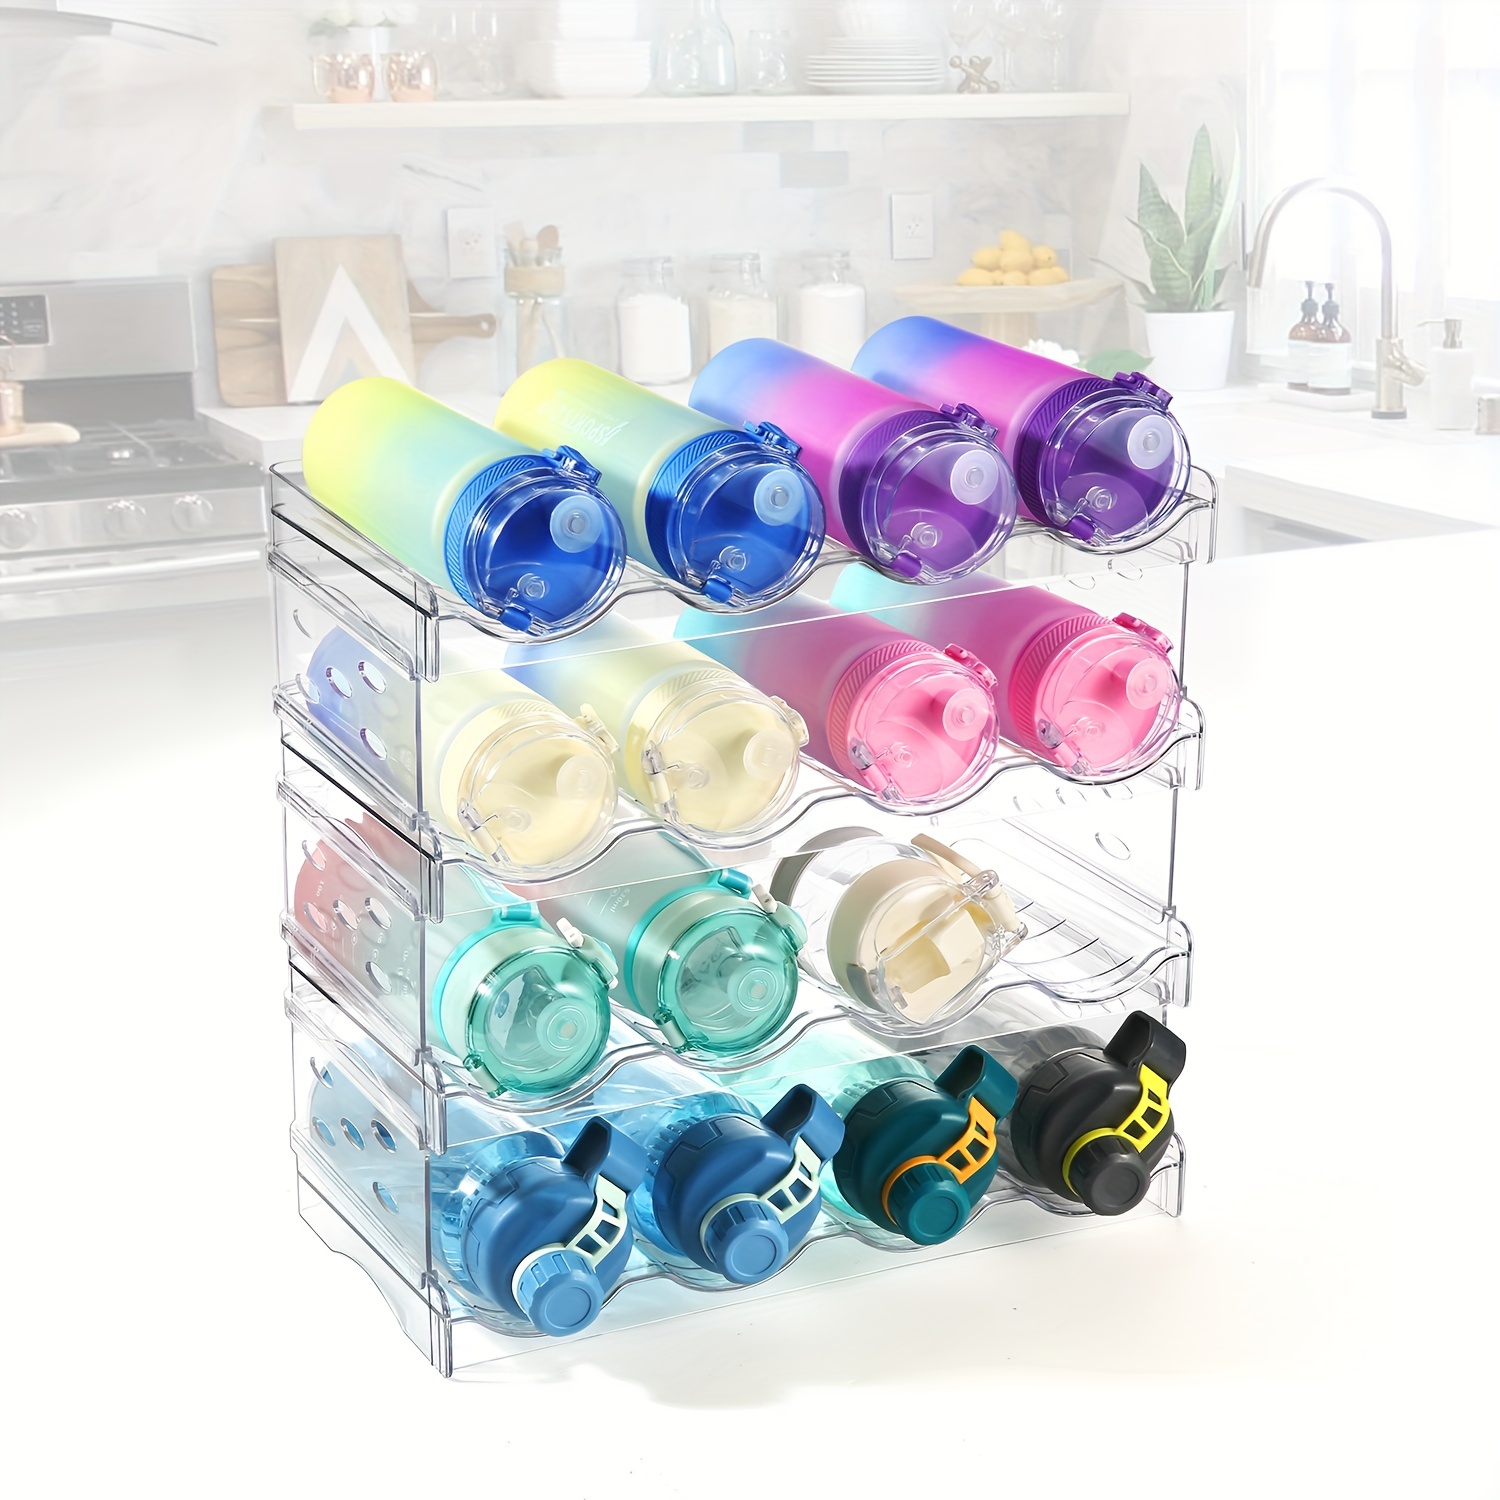  4 Tier Water Bottle Organizer - 16 Bottles, Stackable Cup  Organizer for Cabinet, Countertop, Pantry & Fridge, Free-Standing Kitchen  Tumbler Storage Holder for Wine and Drink Bottles, Clear Plastic : Home